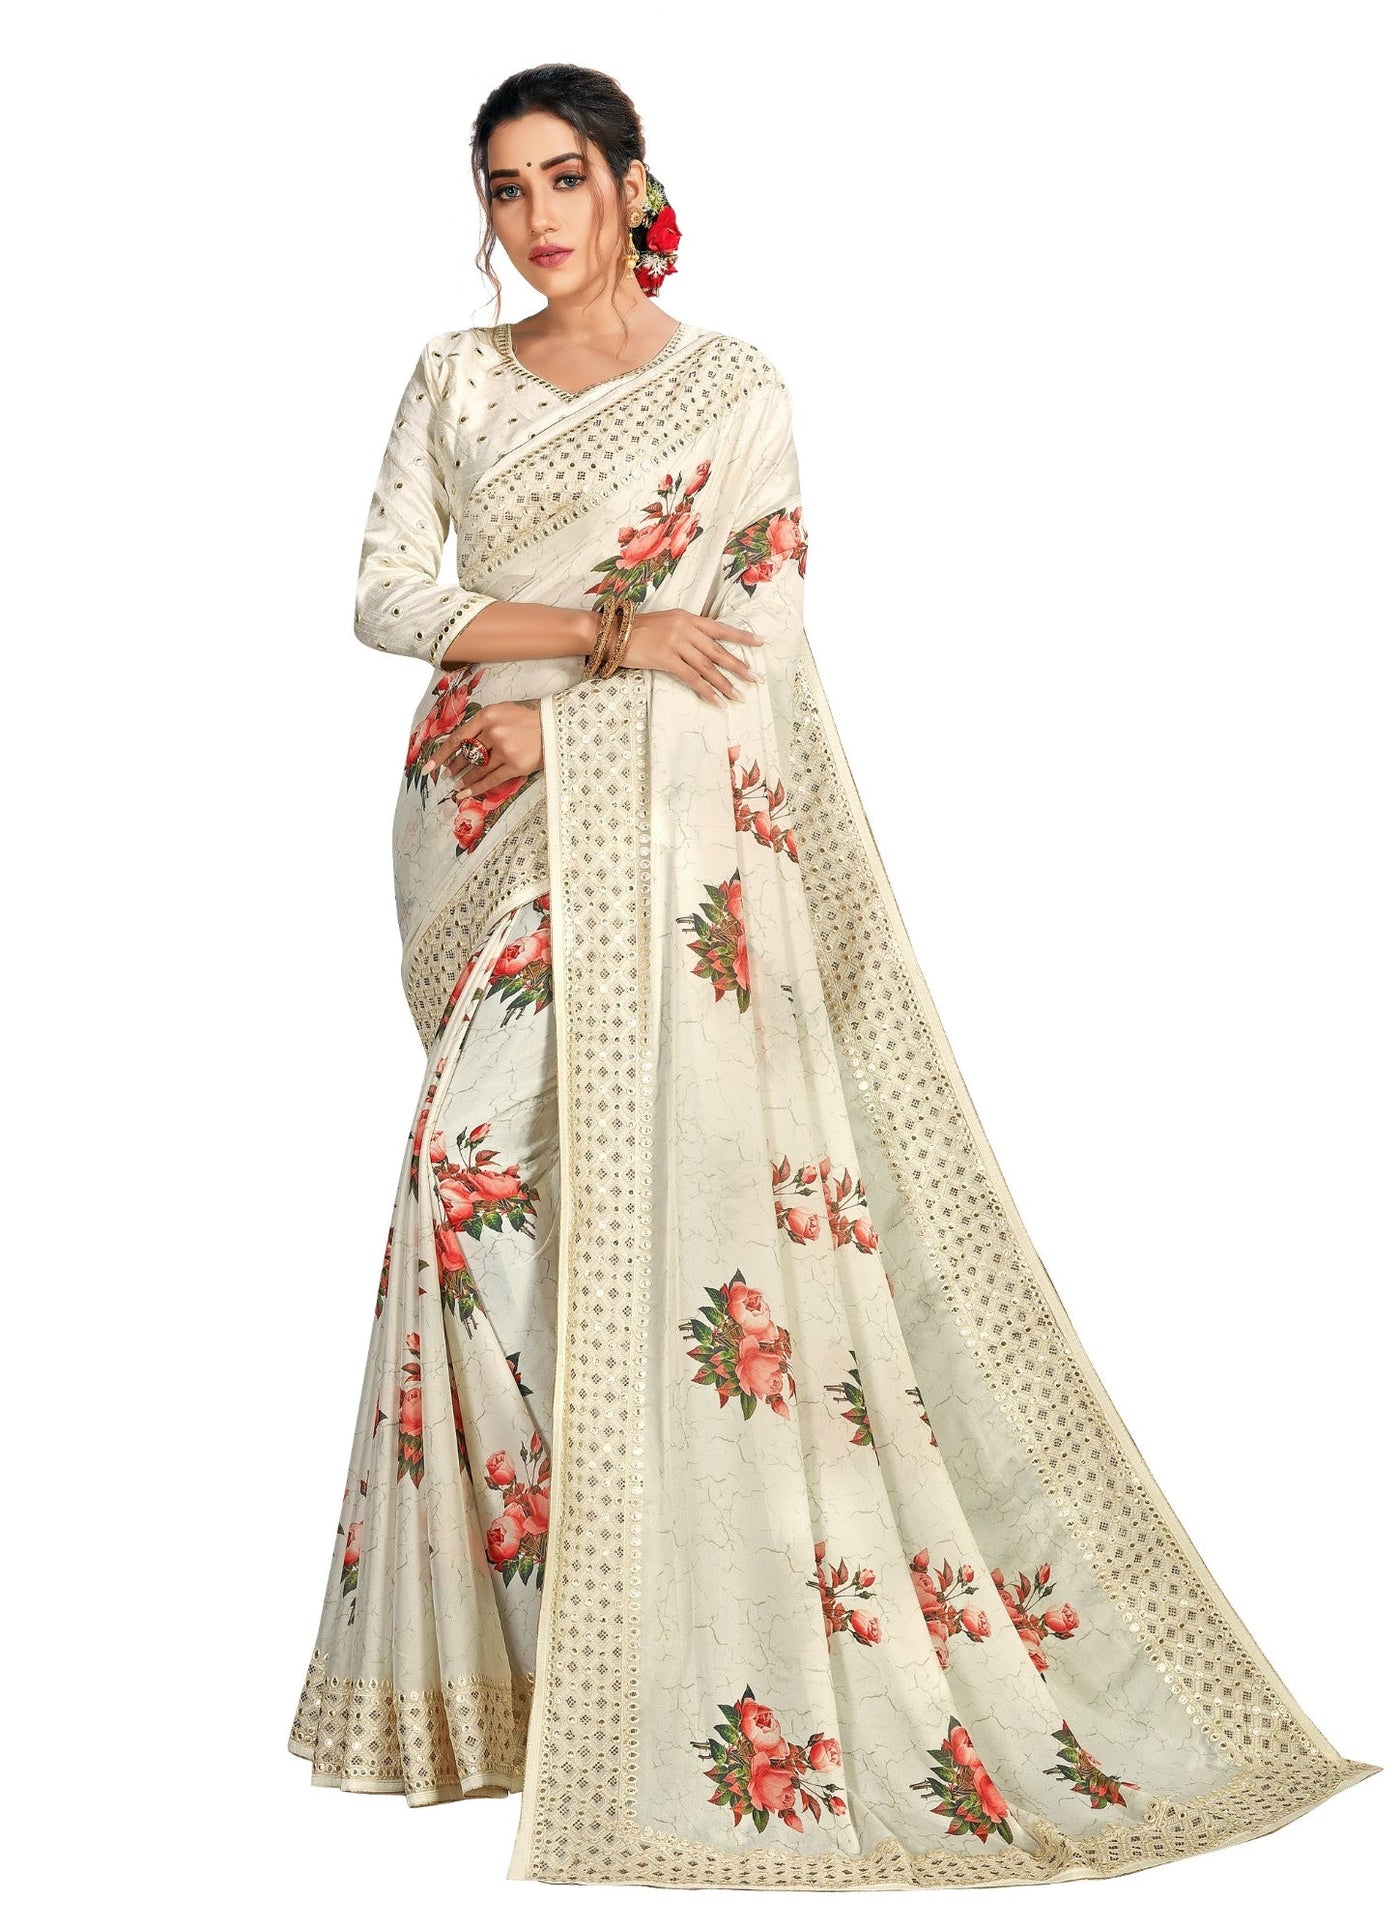 Pure Satin Off White Saree With Blouse